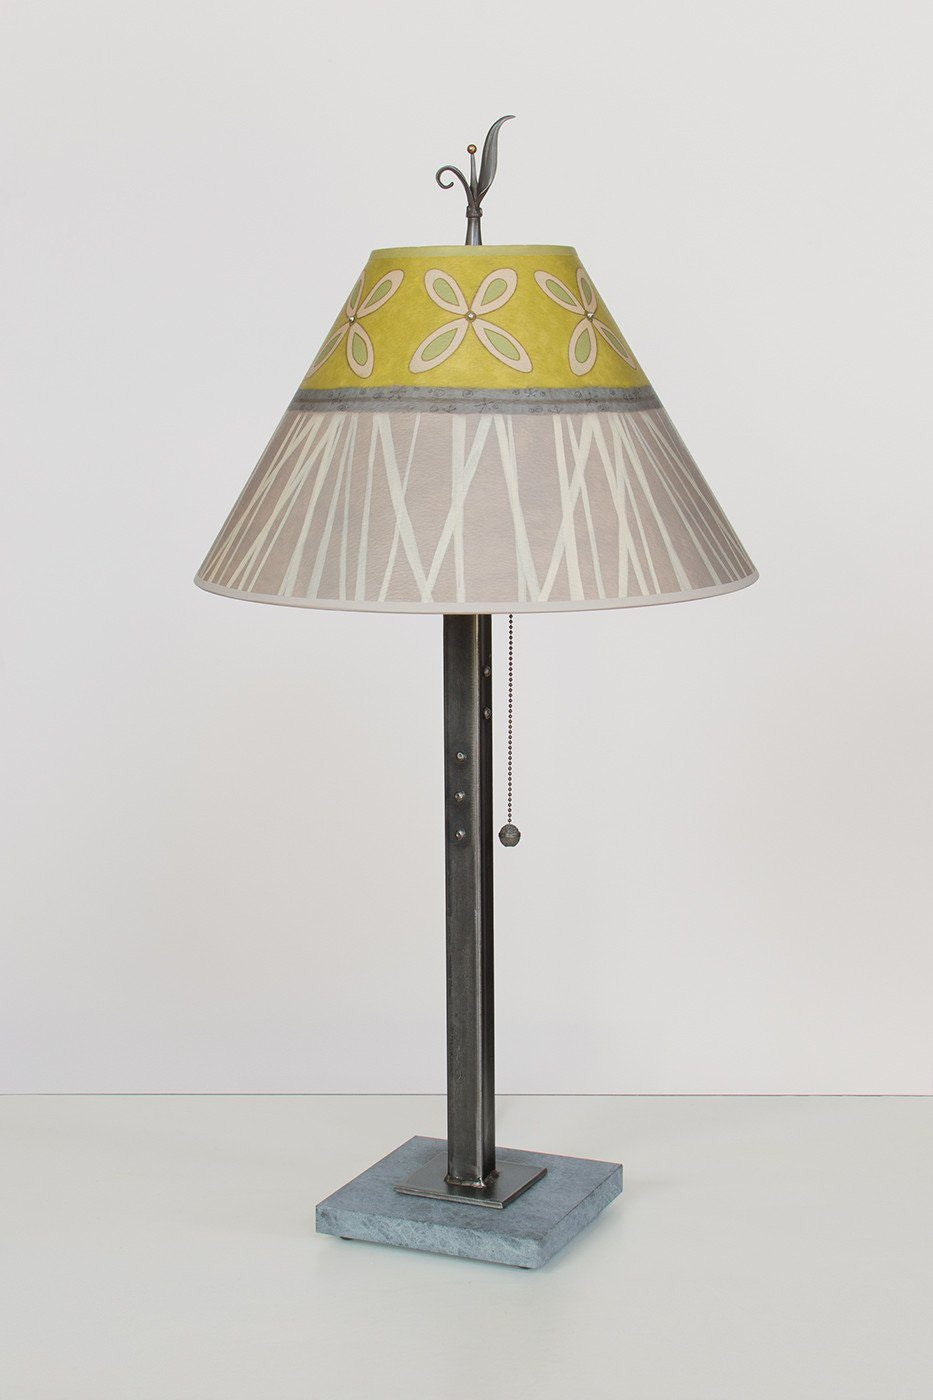 Janna Ugone & Co Table Lamps Steel Table Lamp with Medium Conical Shade in Kiwi